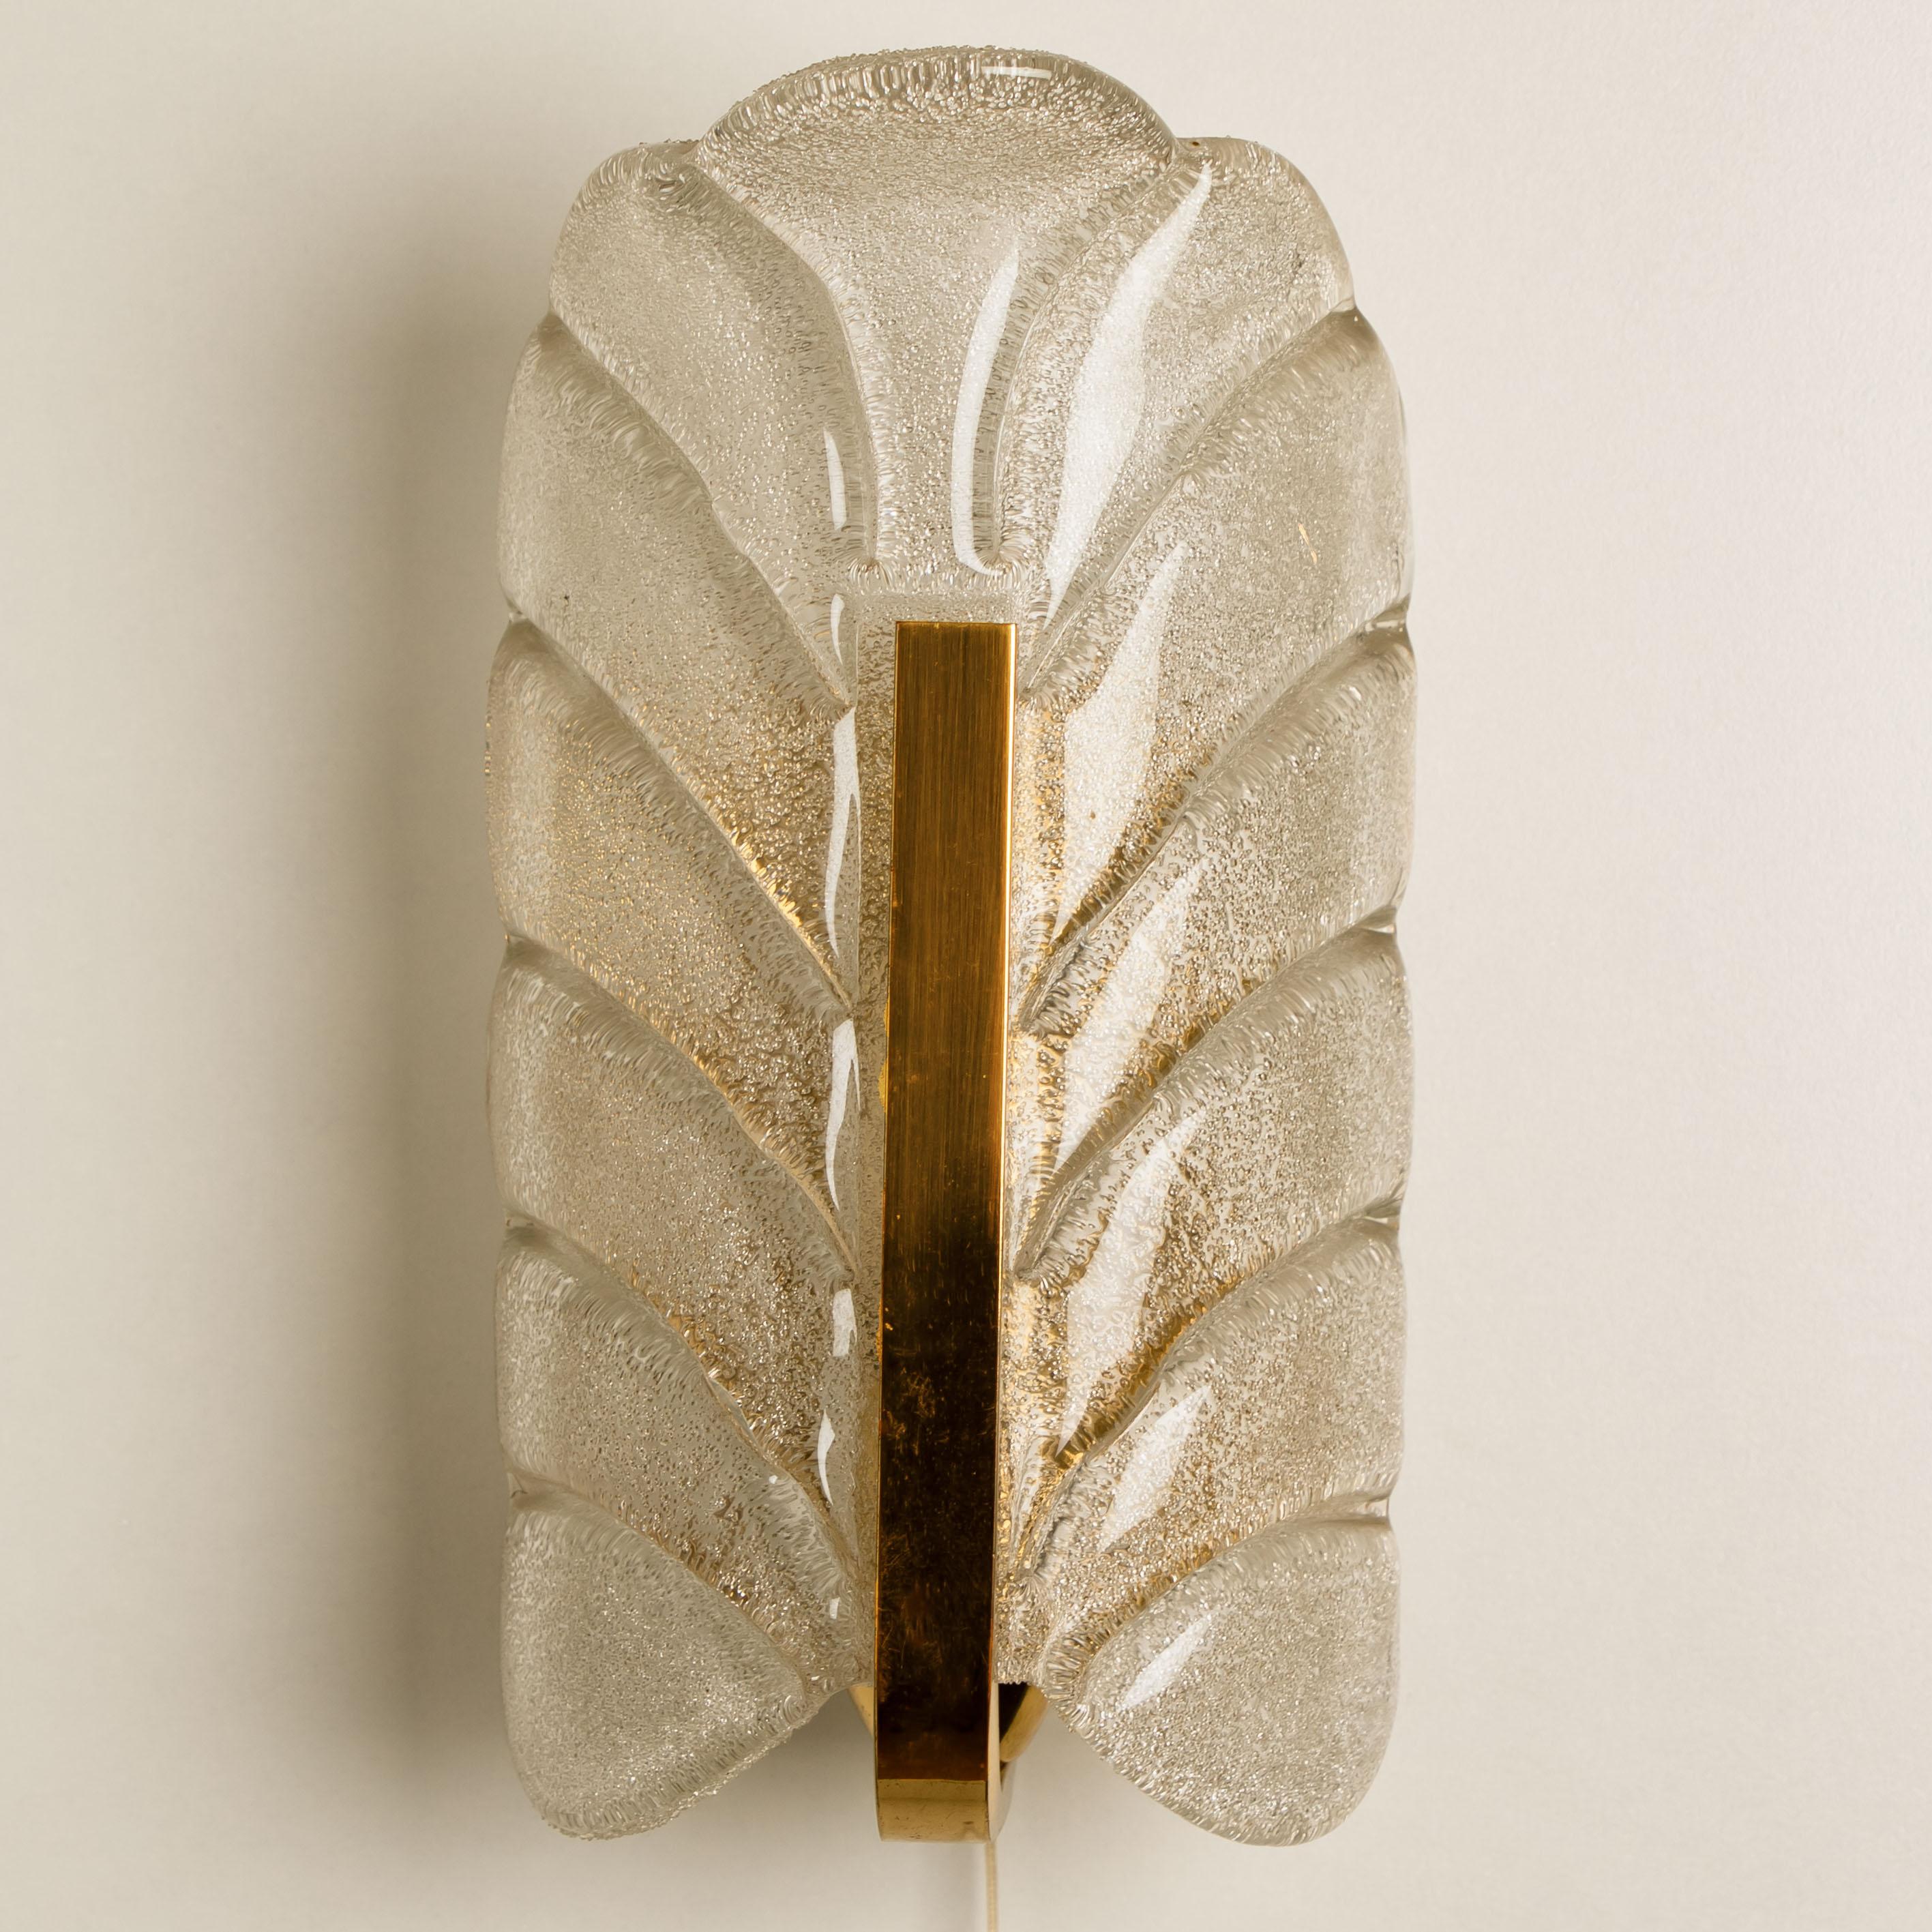 1 of the 12 Brass Wall Scones Fagerlund, 1960 1